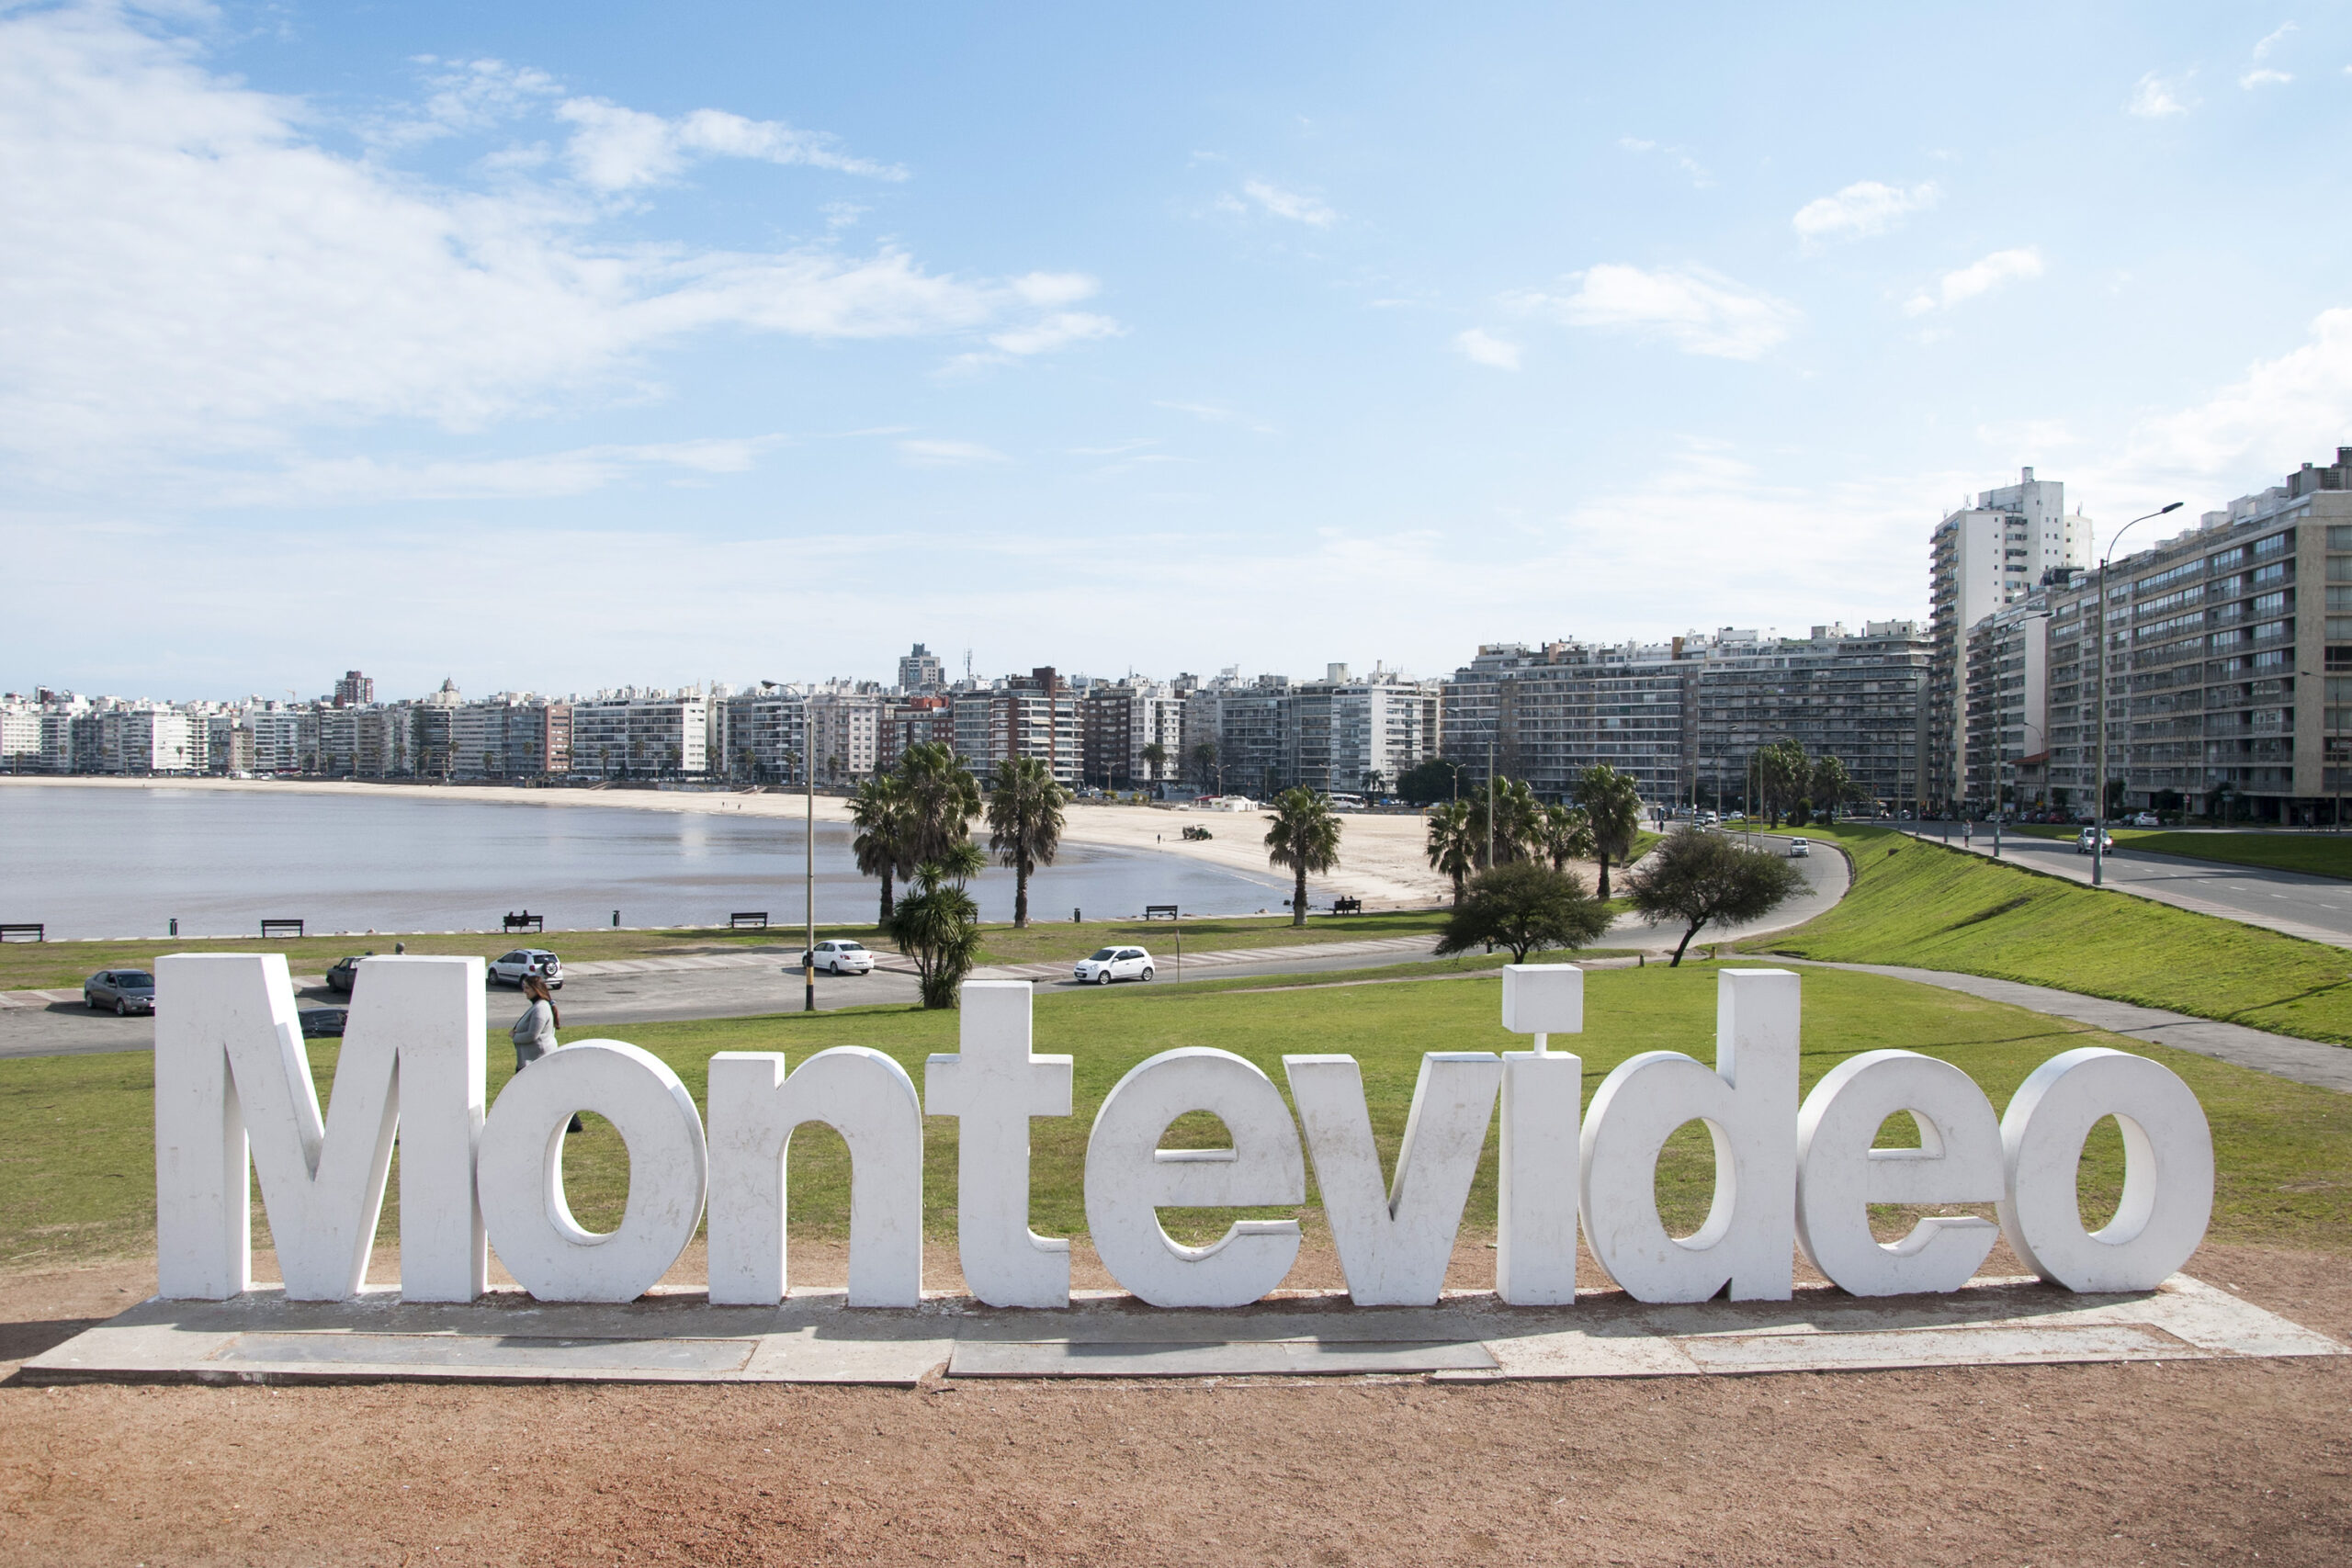 An insider's look at Montevideo, Uruguay's laid-back capital city. Explore the quiet streets and local hangouts in the historic center, and discover the music, food, and culture that makes Montevideo unique